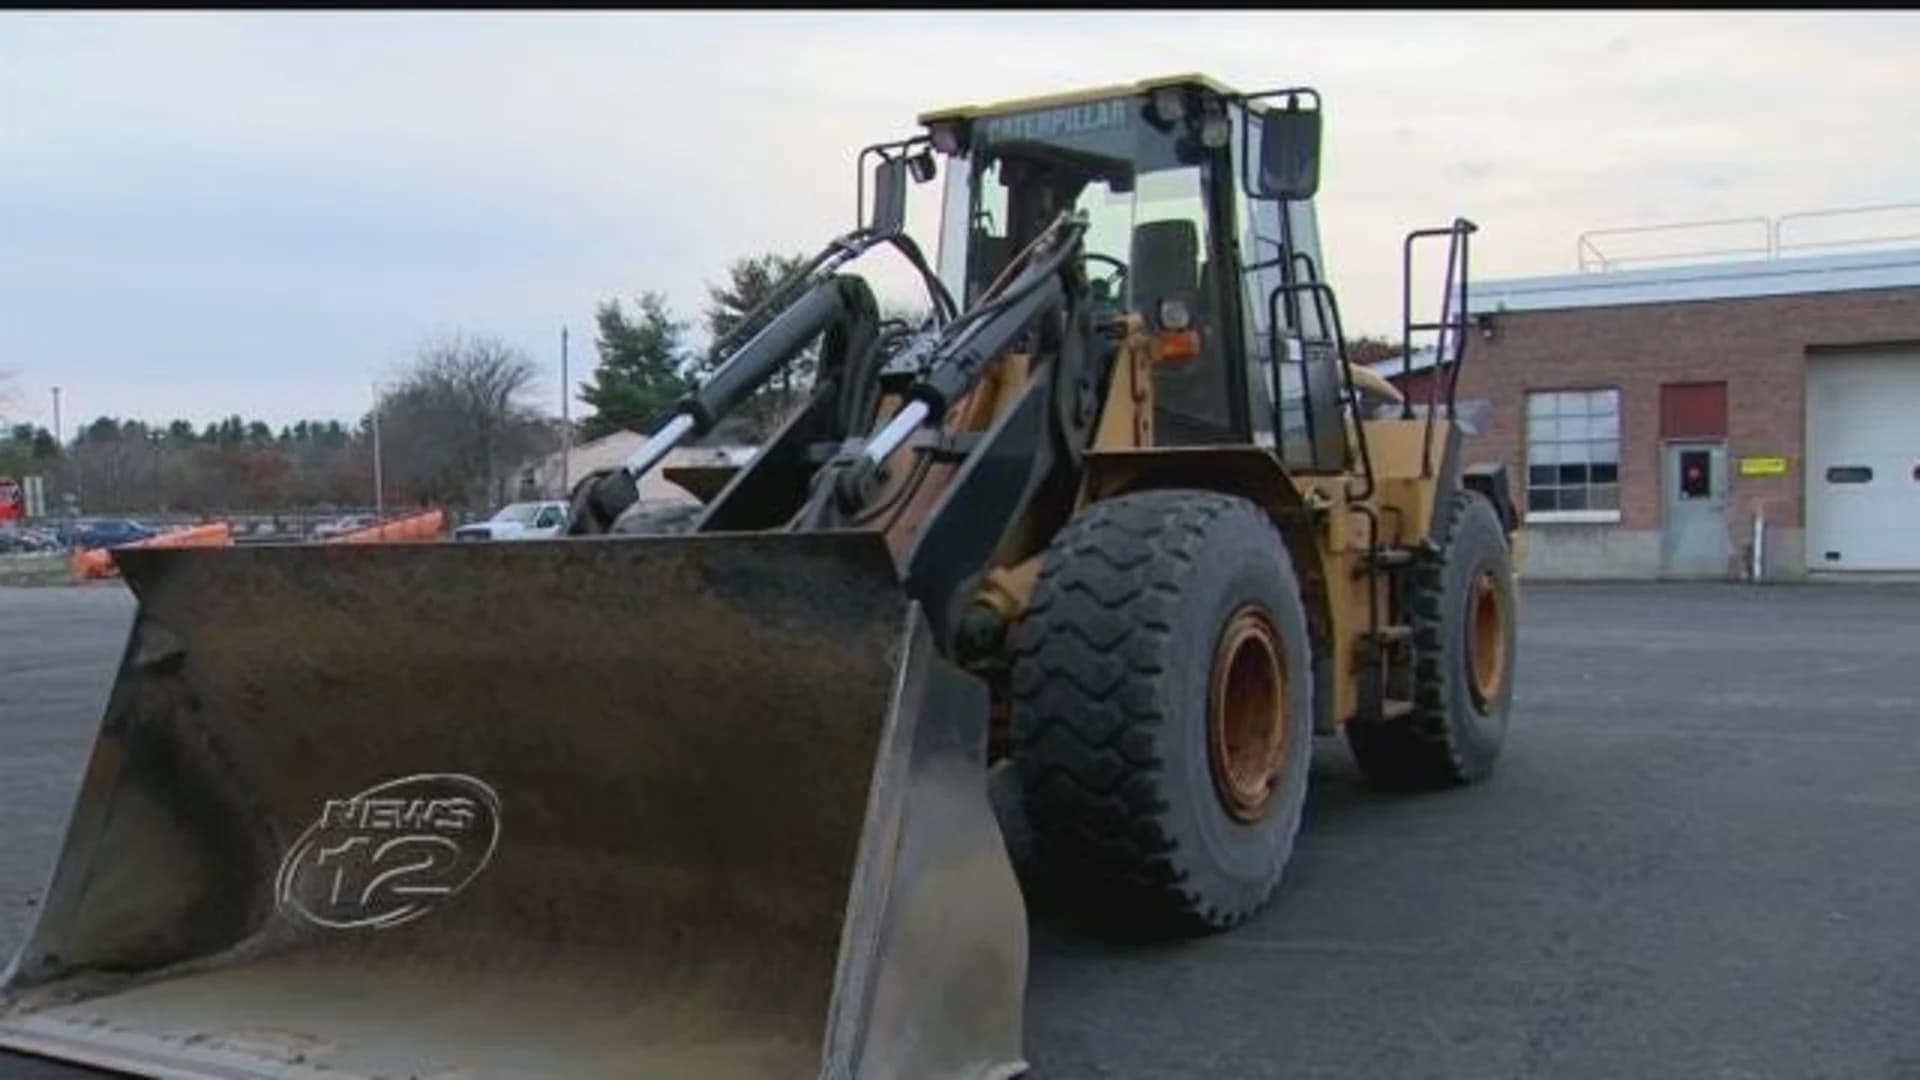 DPW crews gear up for first storm of the season